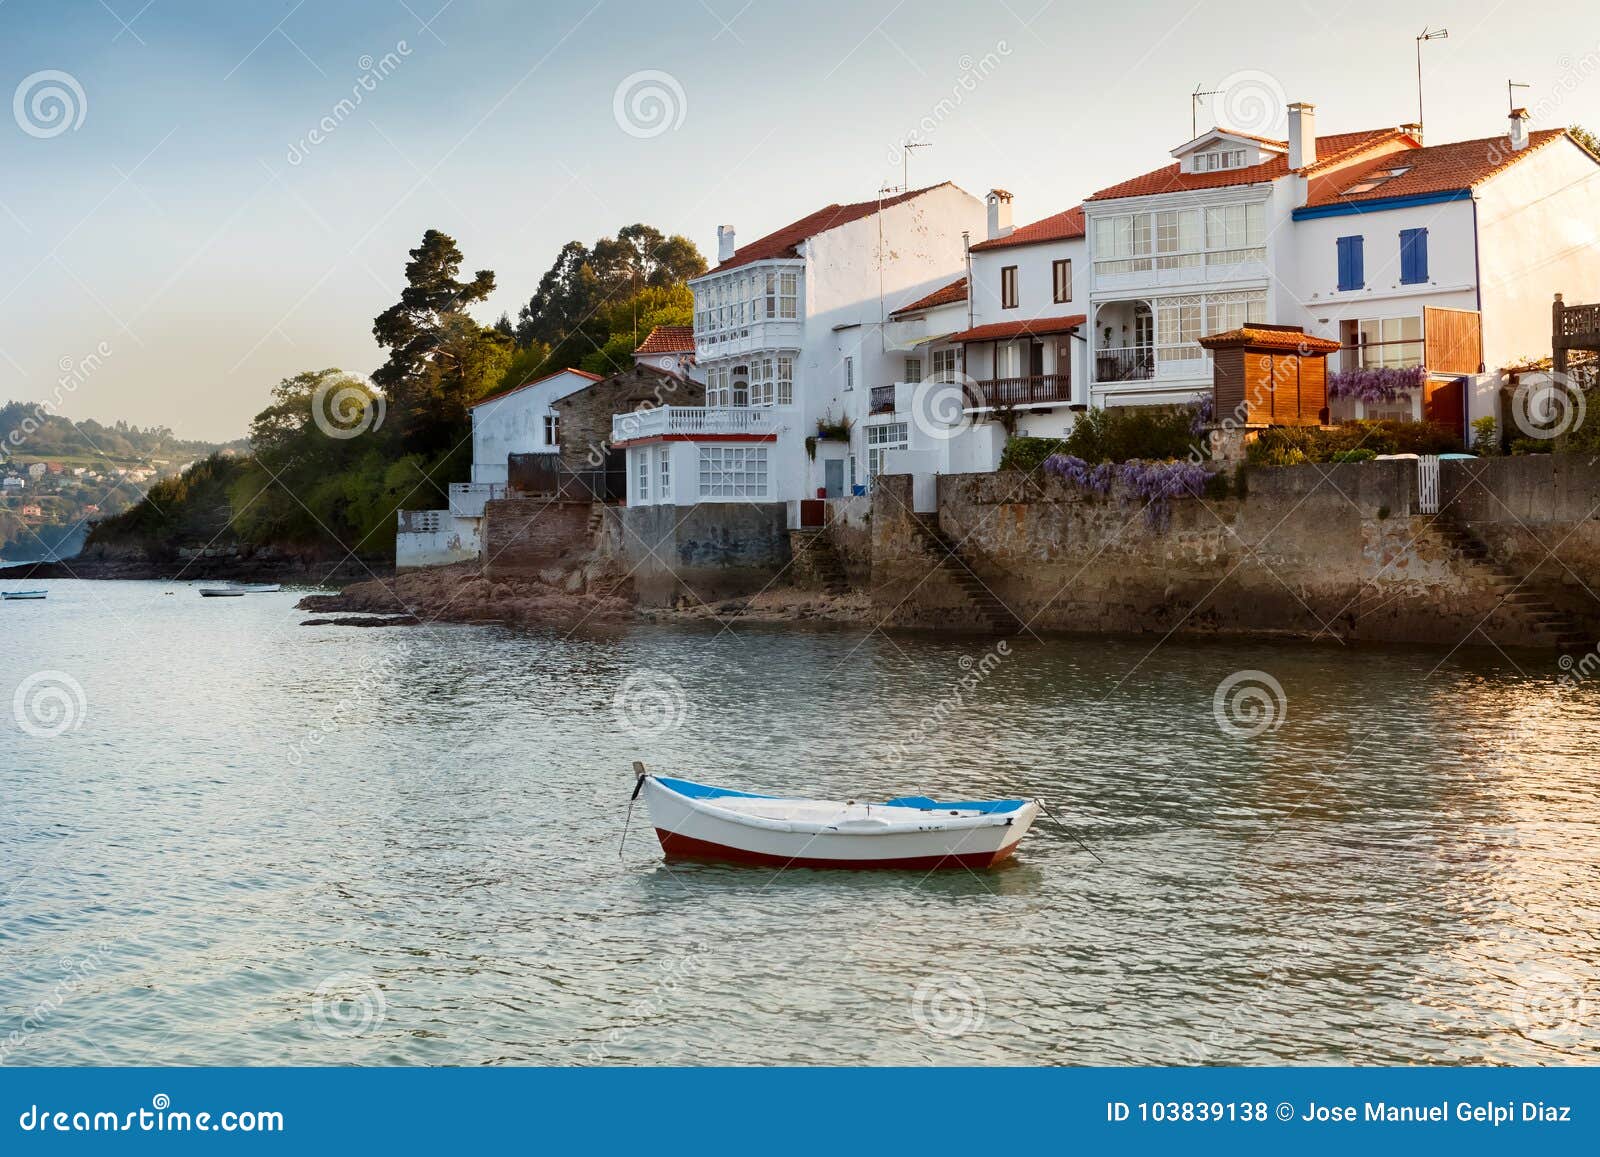 redes: fishing village of spain attached to the sea